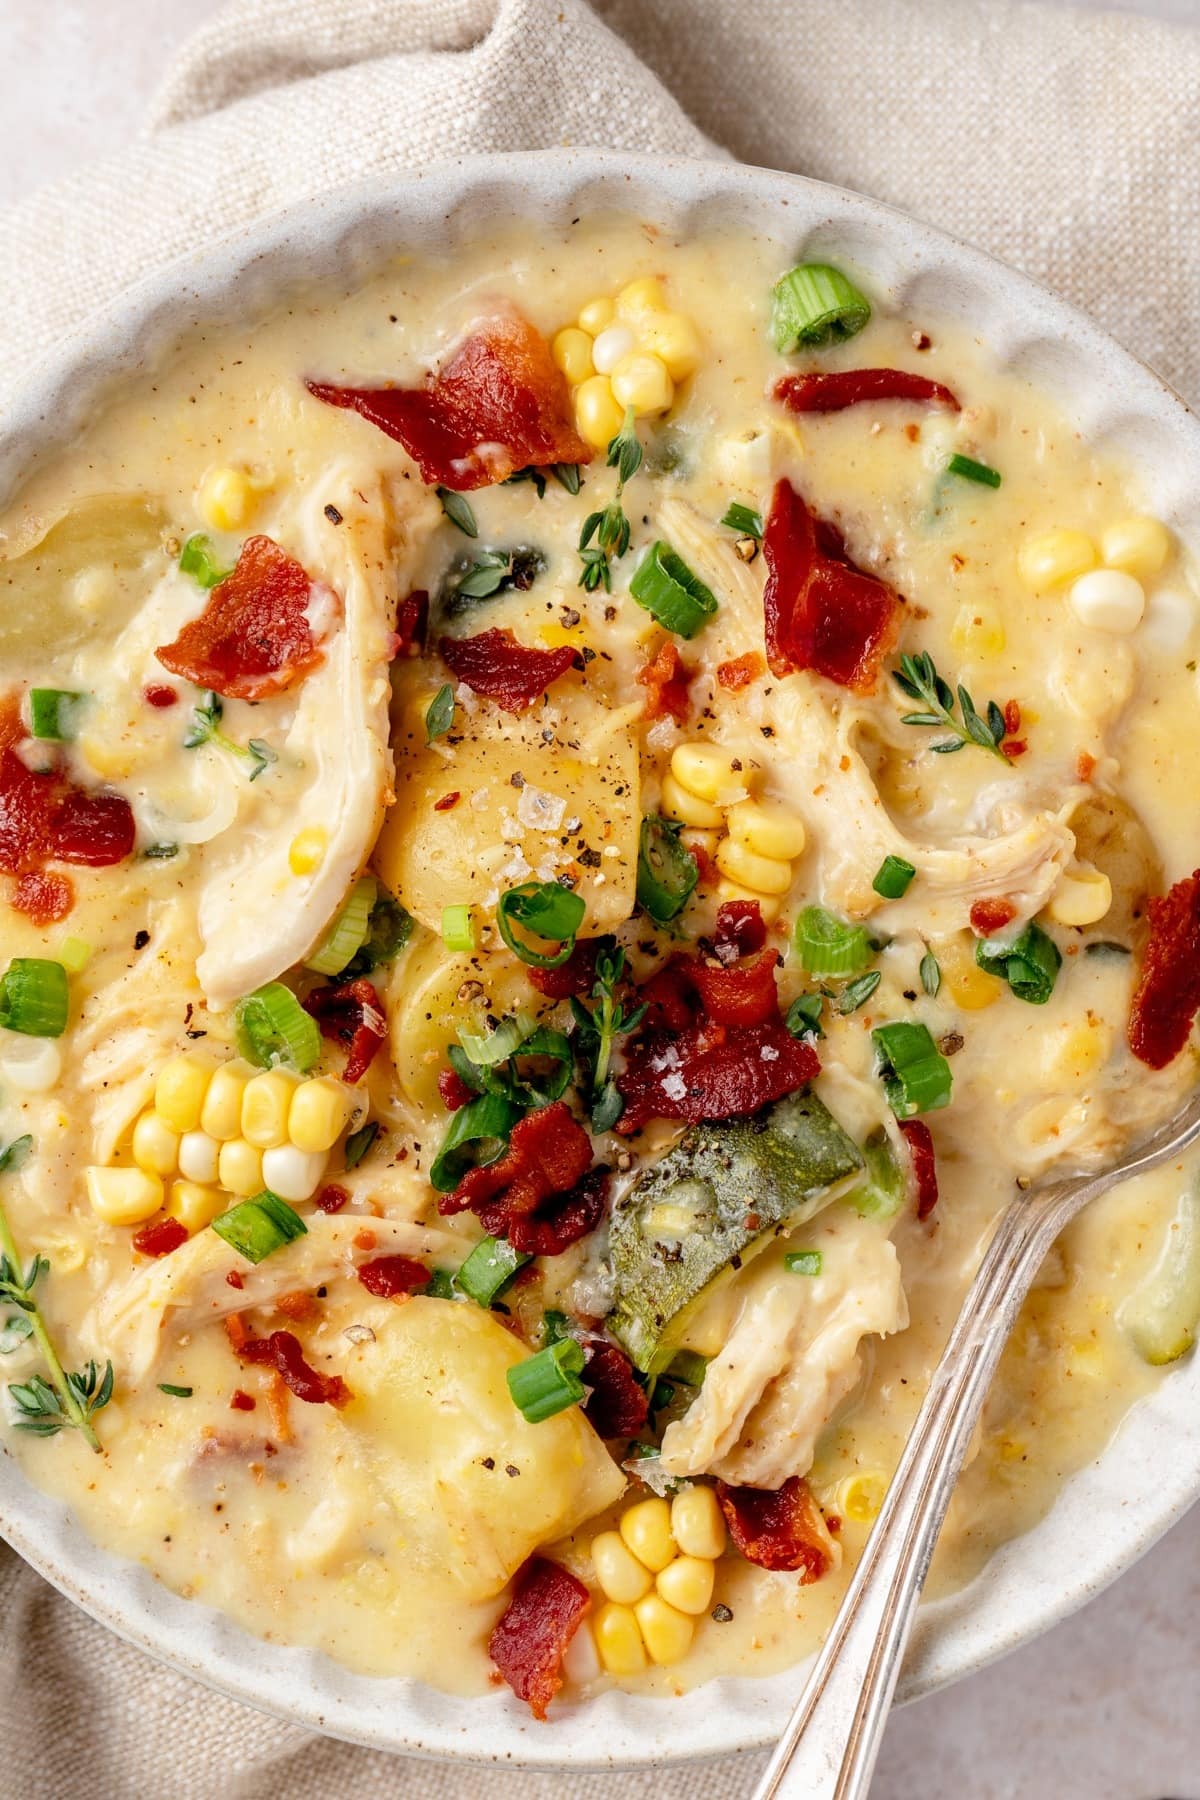 Top view of a bowl of Creamy Chicken Corn Chowder with Bacon